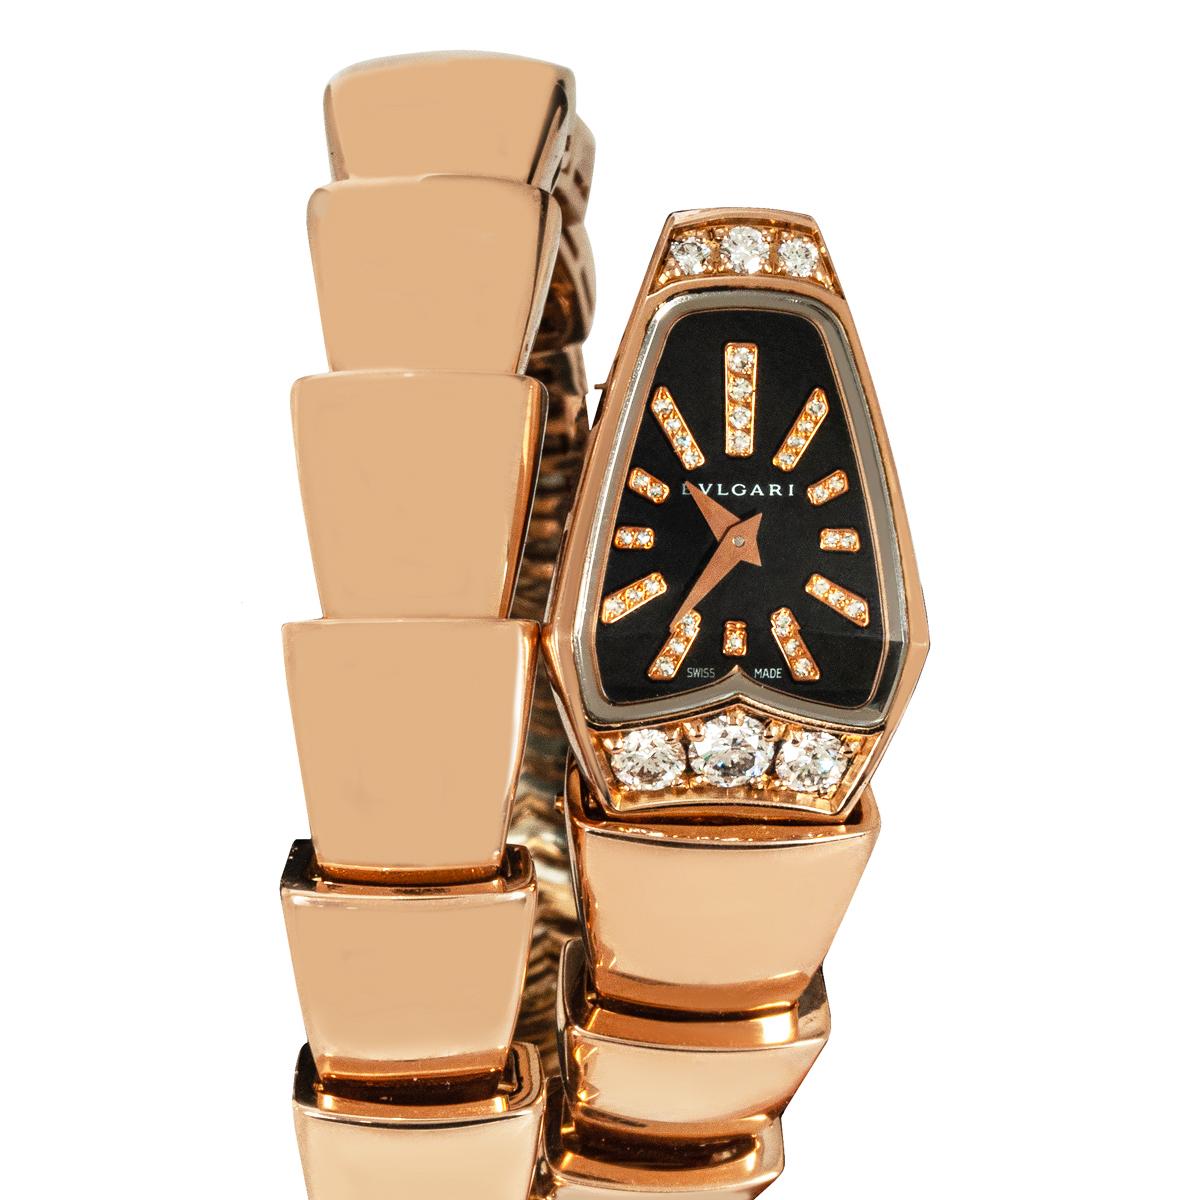 A rose gold Serpenti by Bvlgari. Features a black dial with each hour marker diamond-set. At 12 and 6 o'clock of the case is a total of 6 round brilliant cut diamonds. Fitted with a sapphire crystal and quartz movement. The flexible snake-style rose